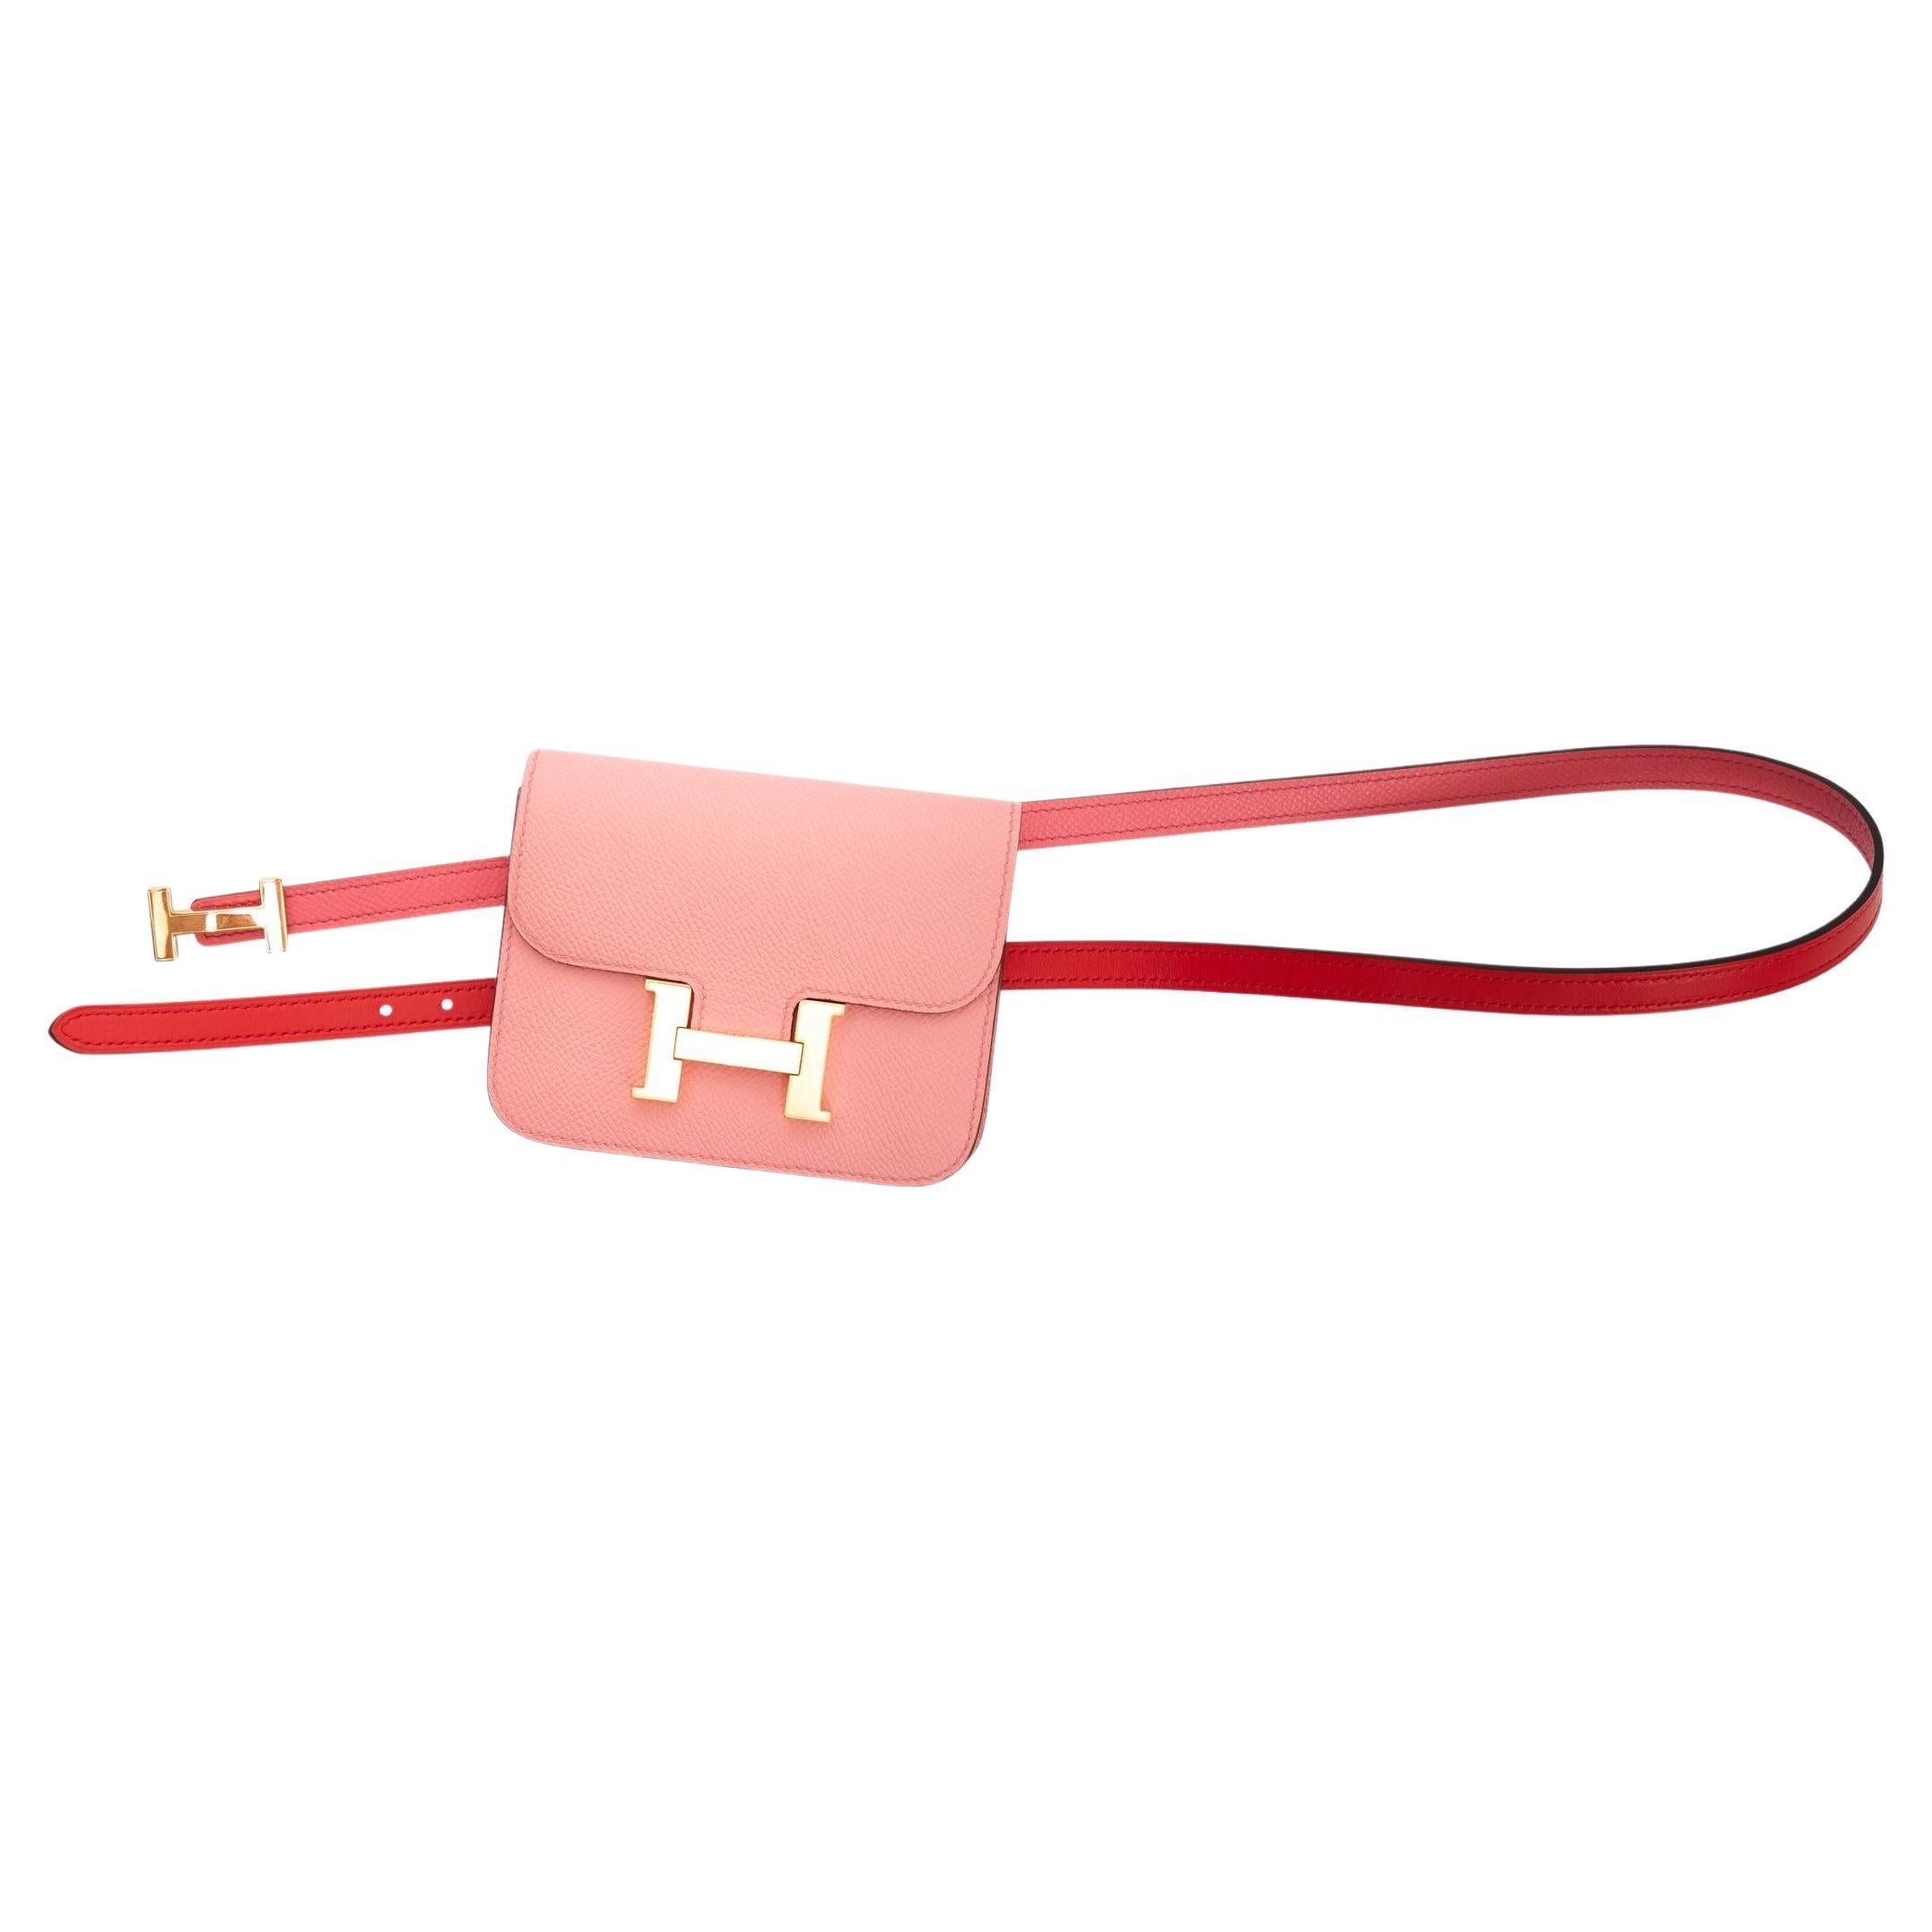 Who is the Hermès Constance bag named after?